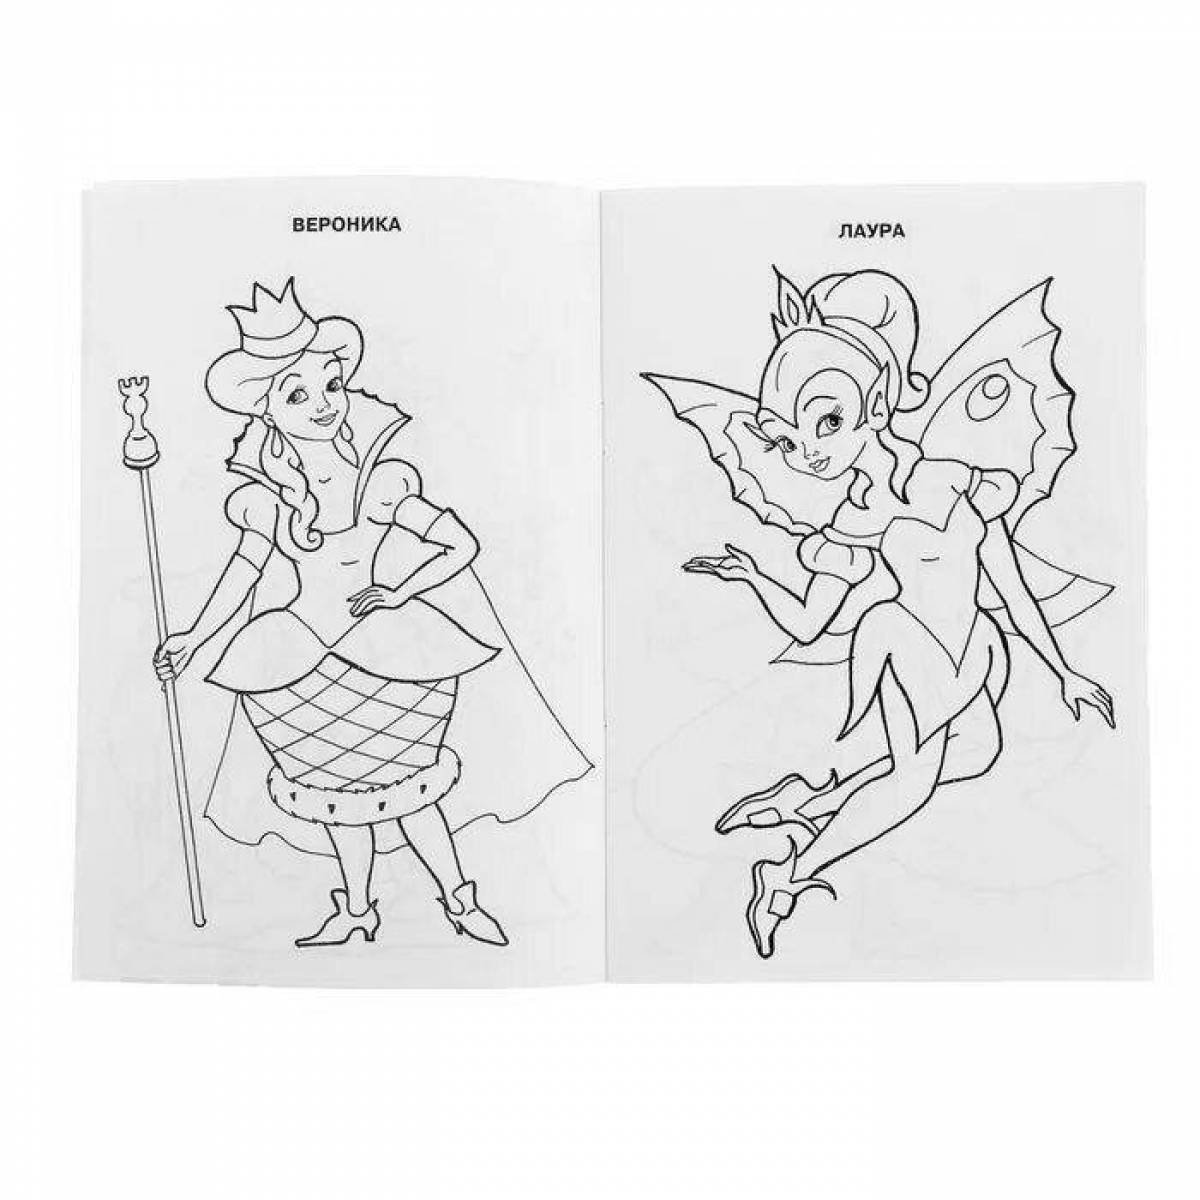 Amazing coloring pages for girls